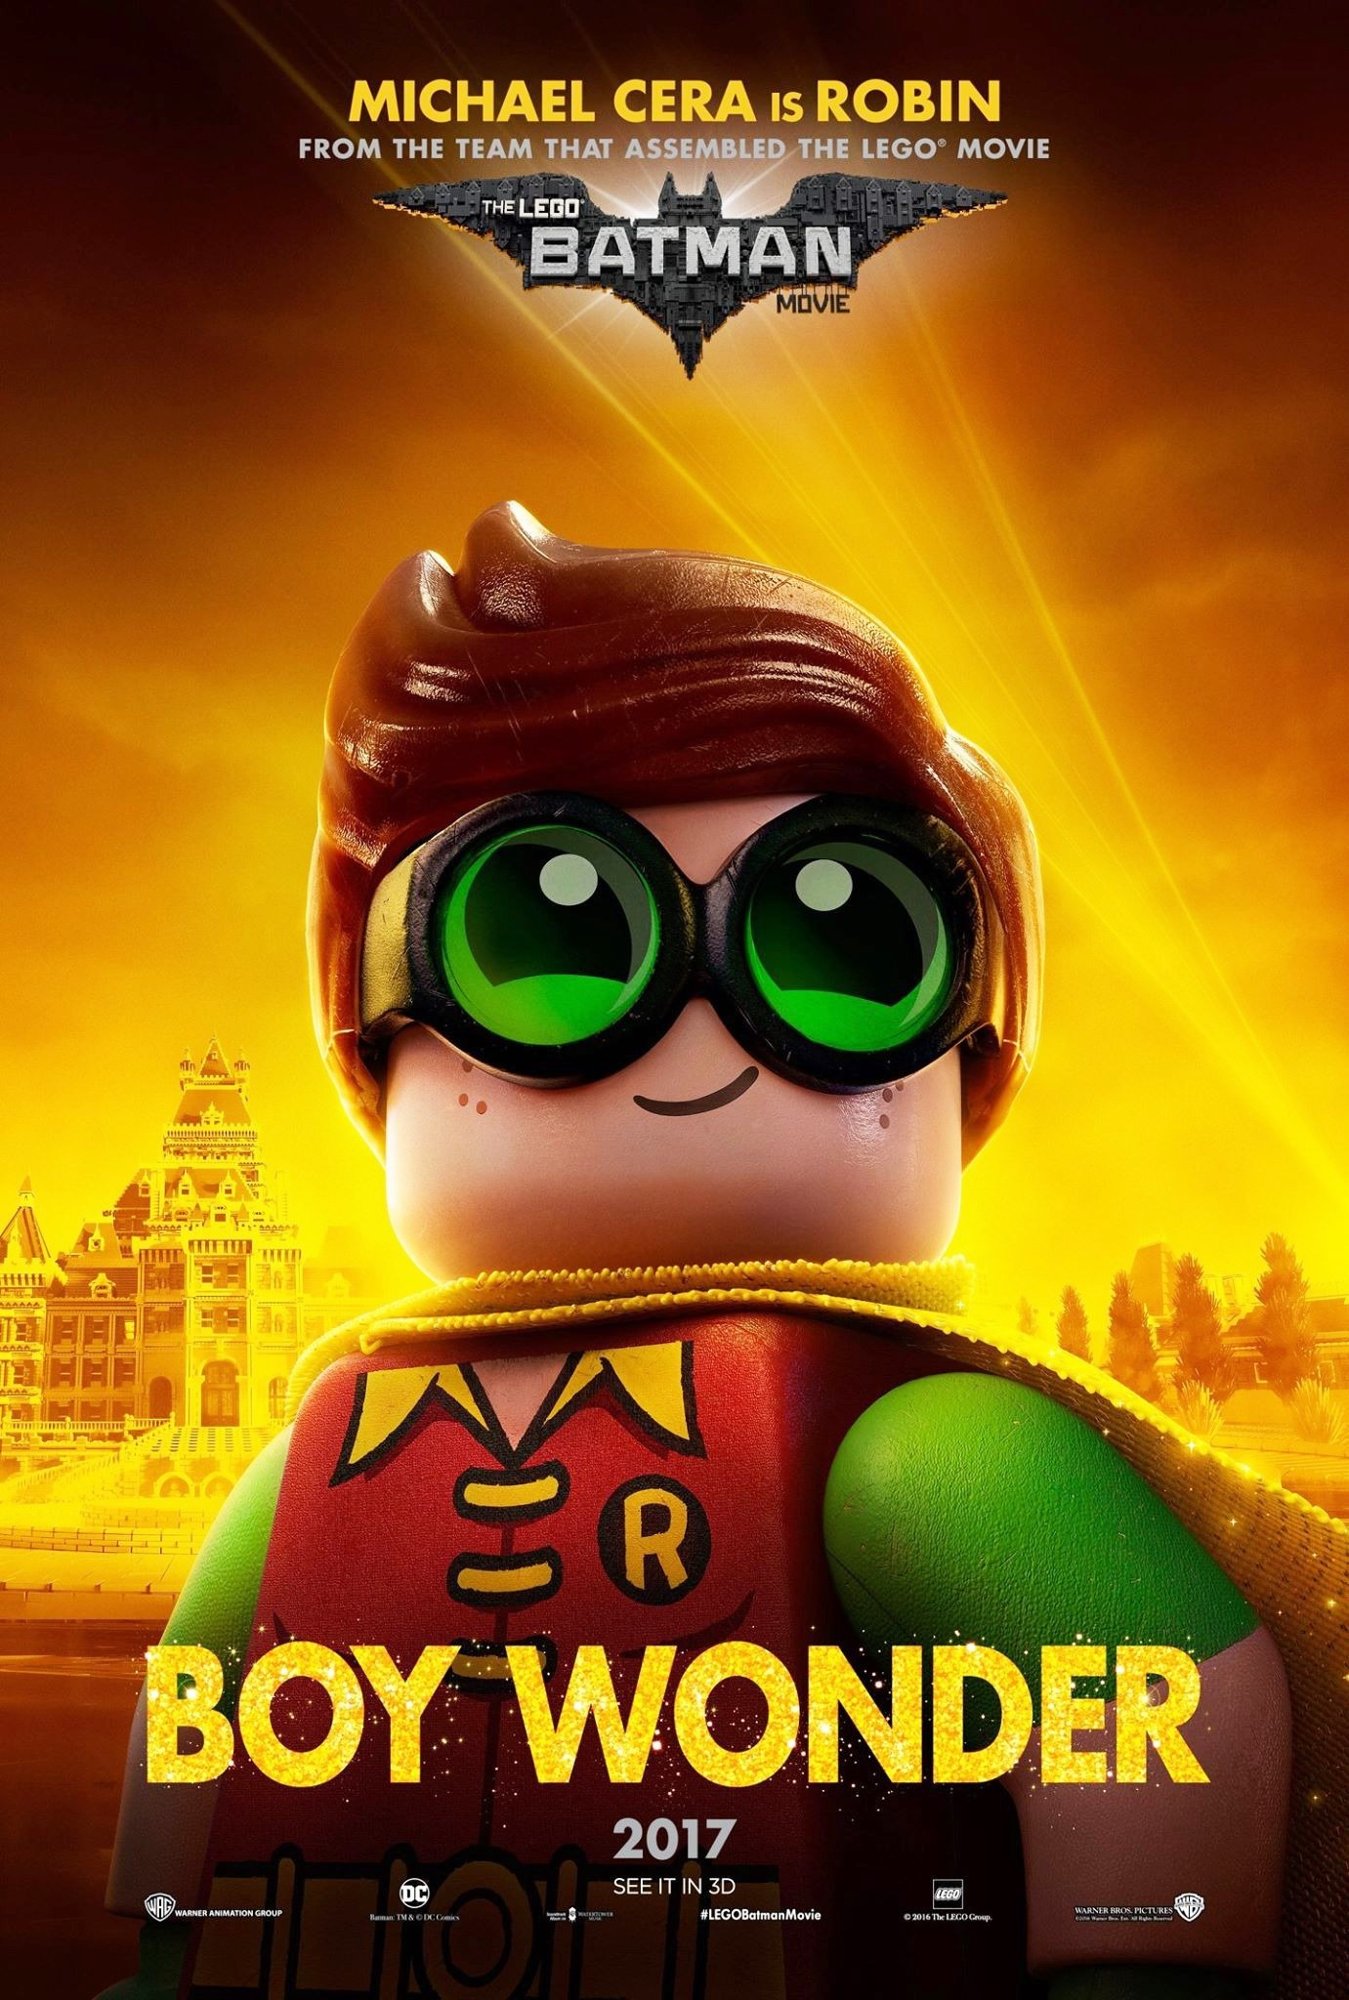 Poster of Warner Bros. Pictures' The Lego Batman Movie (2017)